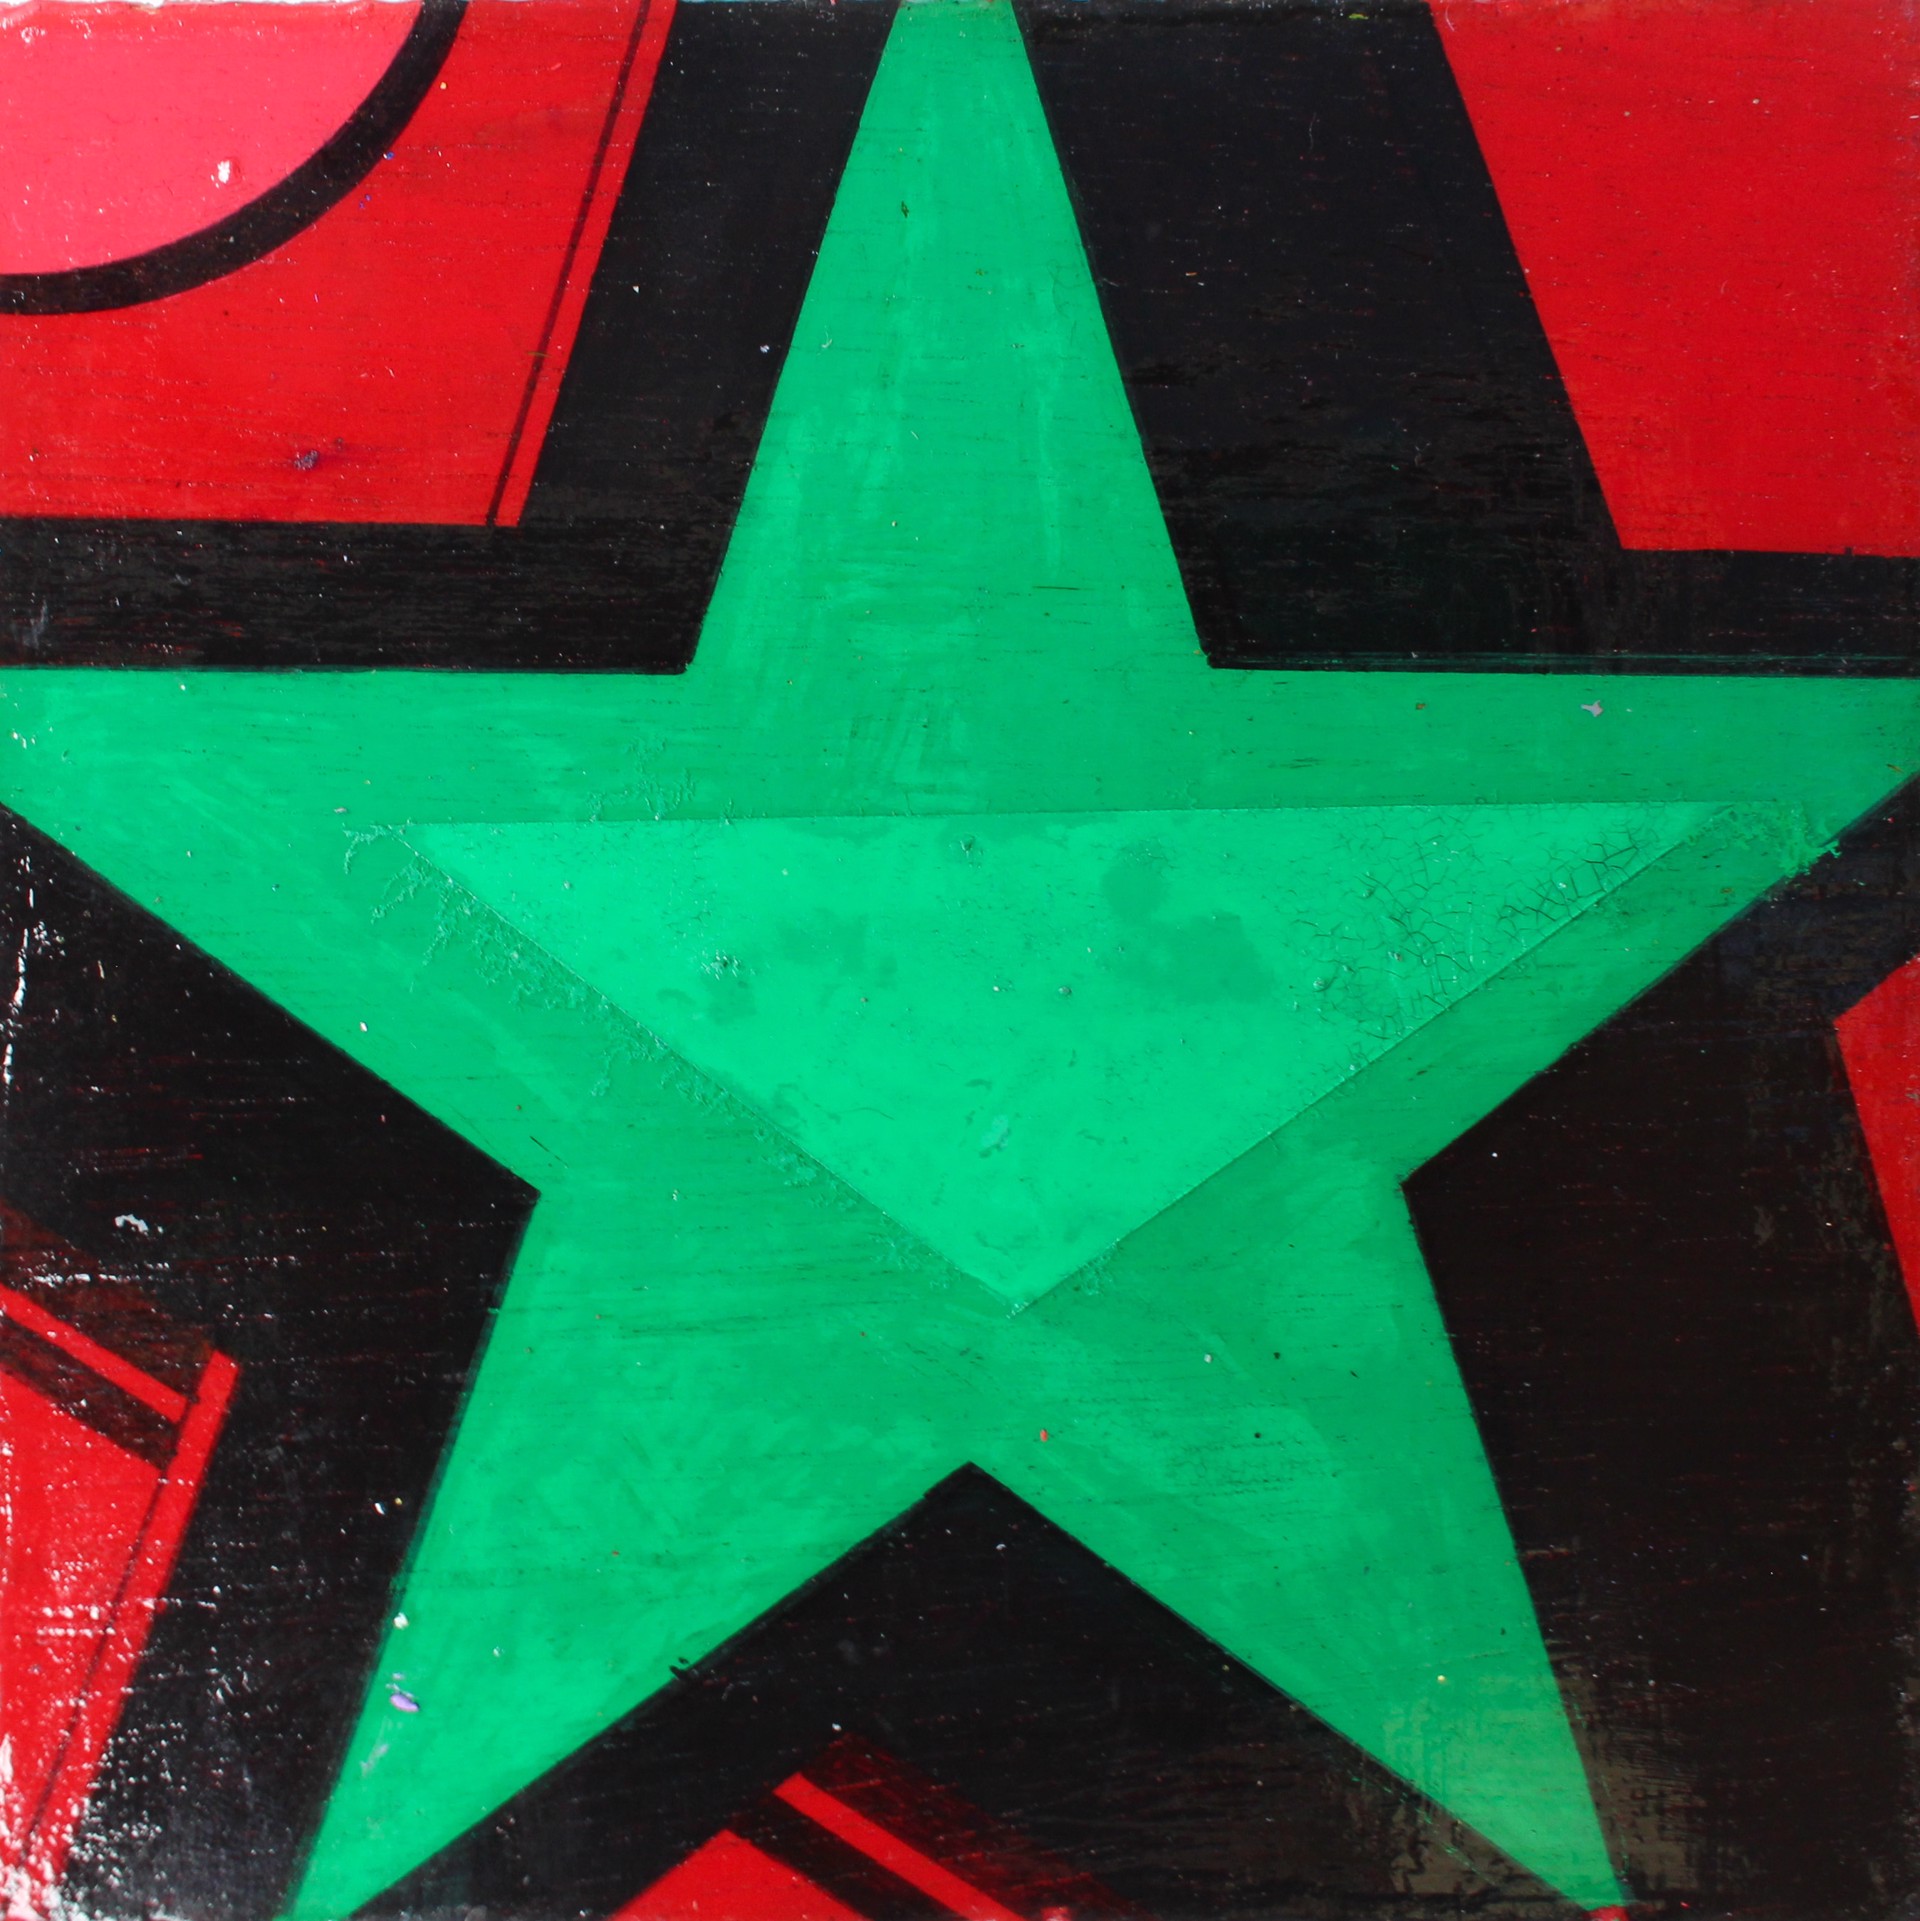 Coaster with American Flag and Green Star (1) by Keith Lewis